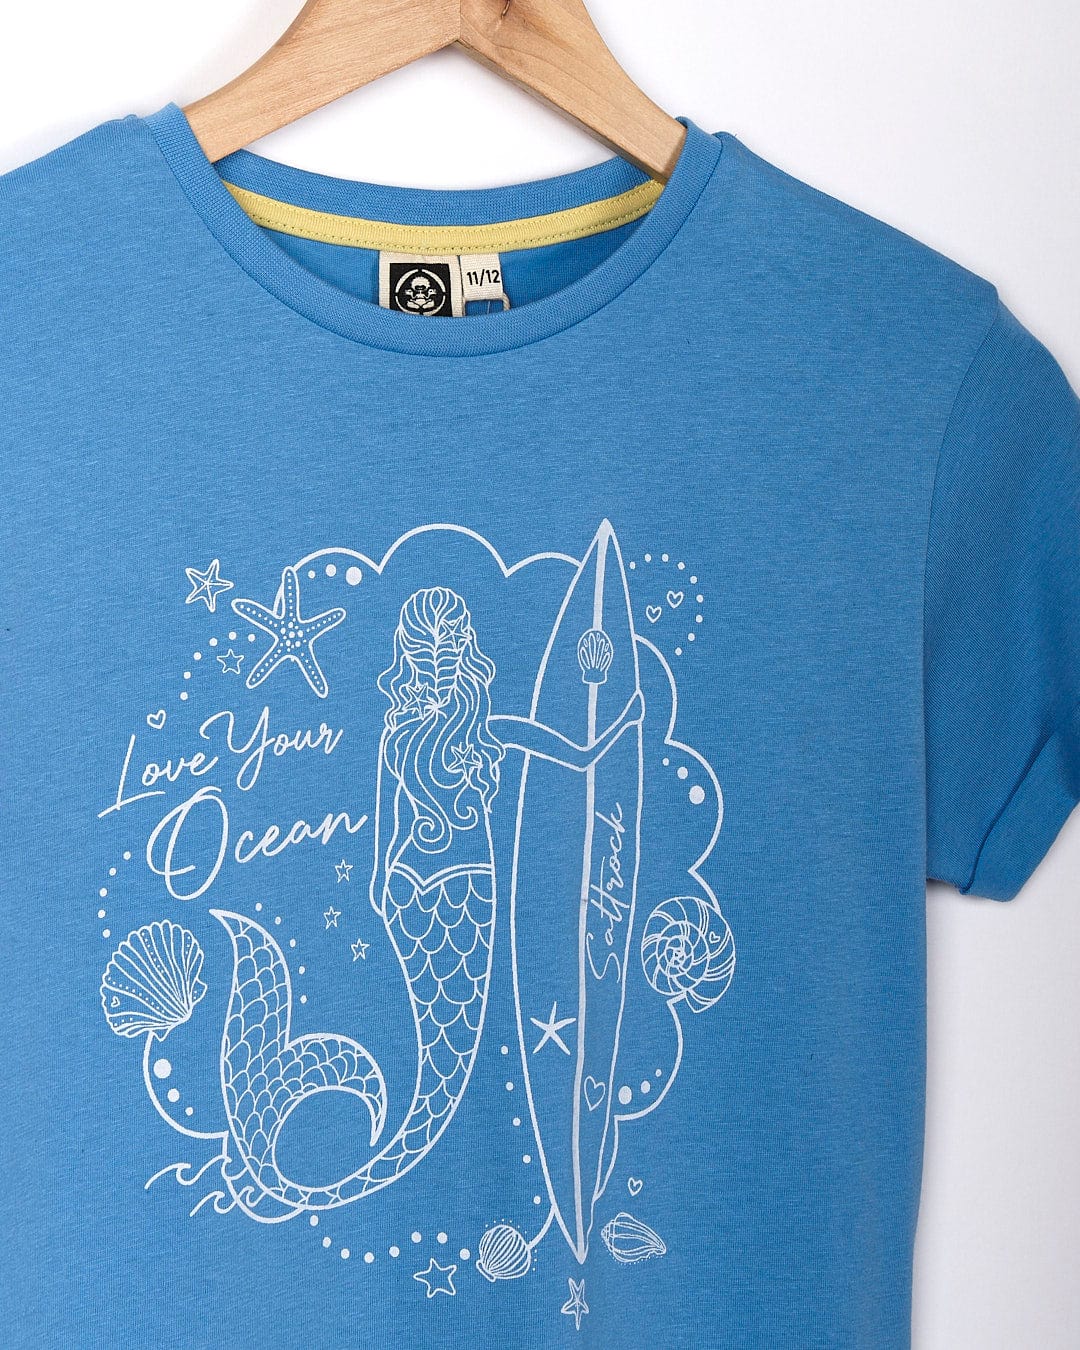 A Mermaid Surf - Kids Short Sleeve T-Shirt - Light Blue featuring a mermaid image embracing the surf lifestyle by Saltrock.